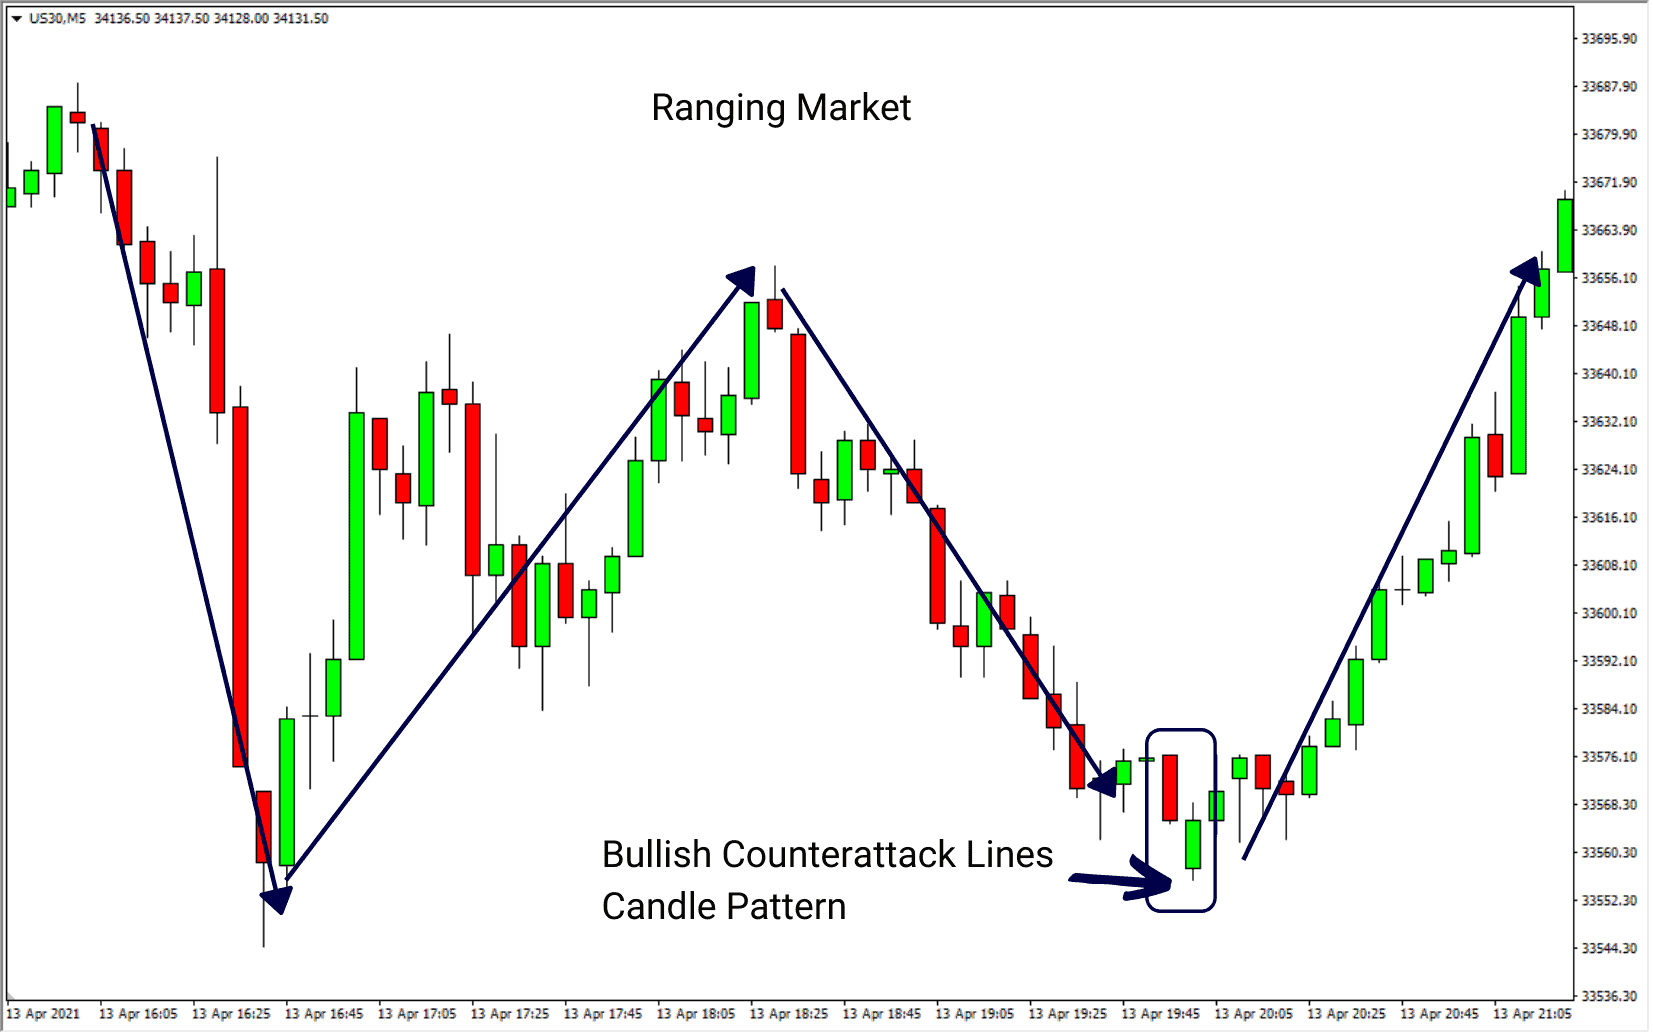 Bullish-Counterattack-Lines-Candle-Pattern-In-A-Ranging-Market-Example.png